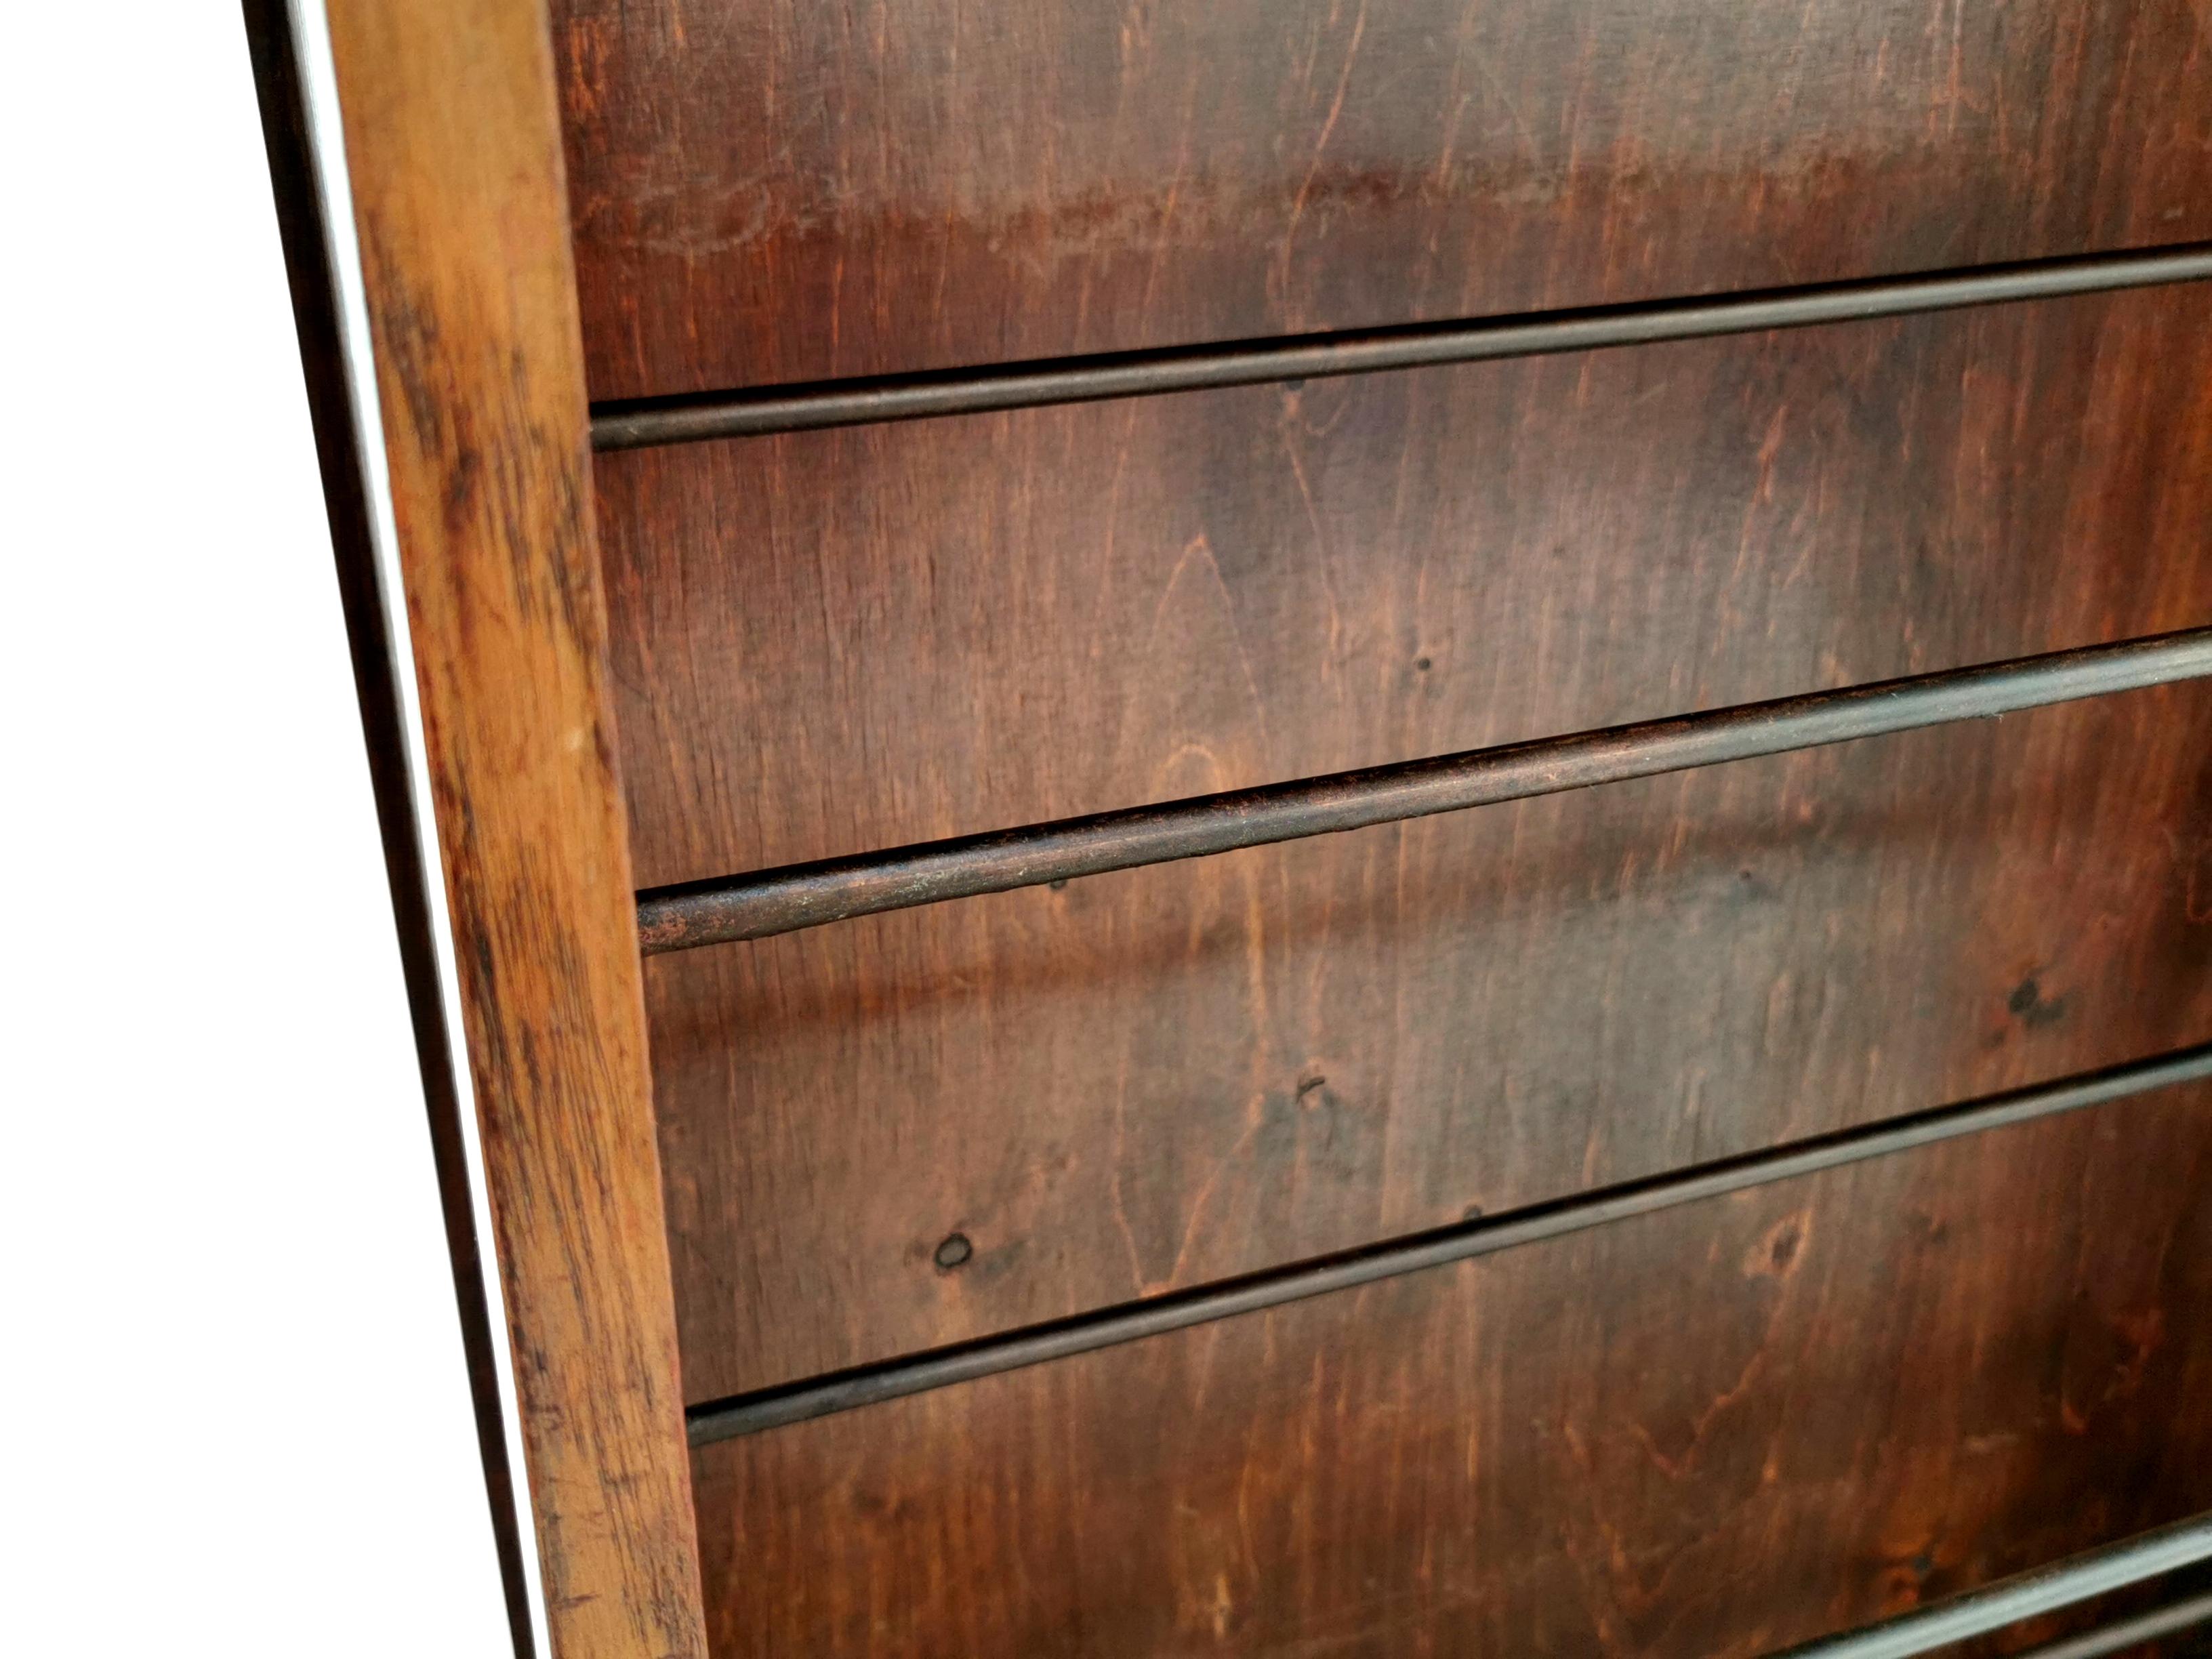 Shoe rack cupboard

An early 20th century oak shoe rack cupboard with internal metal supporting rails.

Scarcely found item.

Dimensions (cm):? ?

91 H x 77 W x 33 D

Condition:?

In very good antique condition, some signs of use as